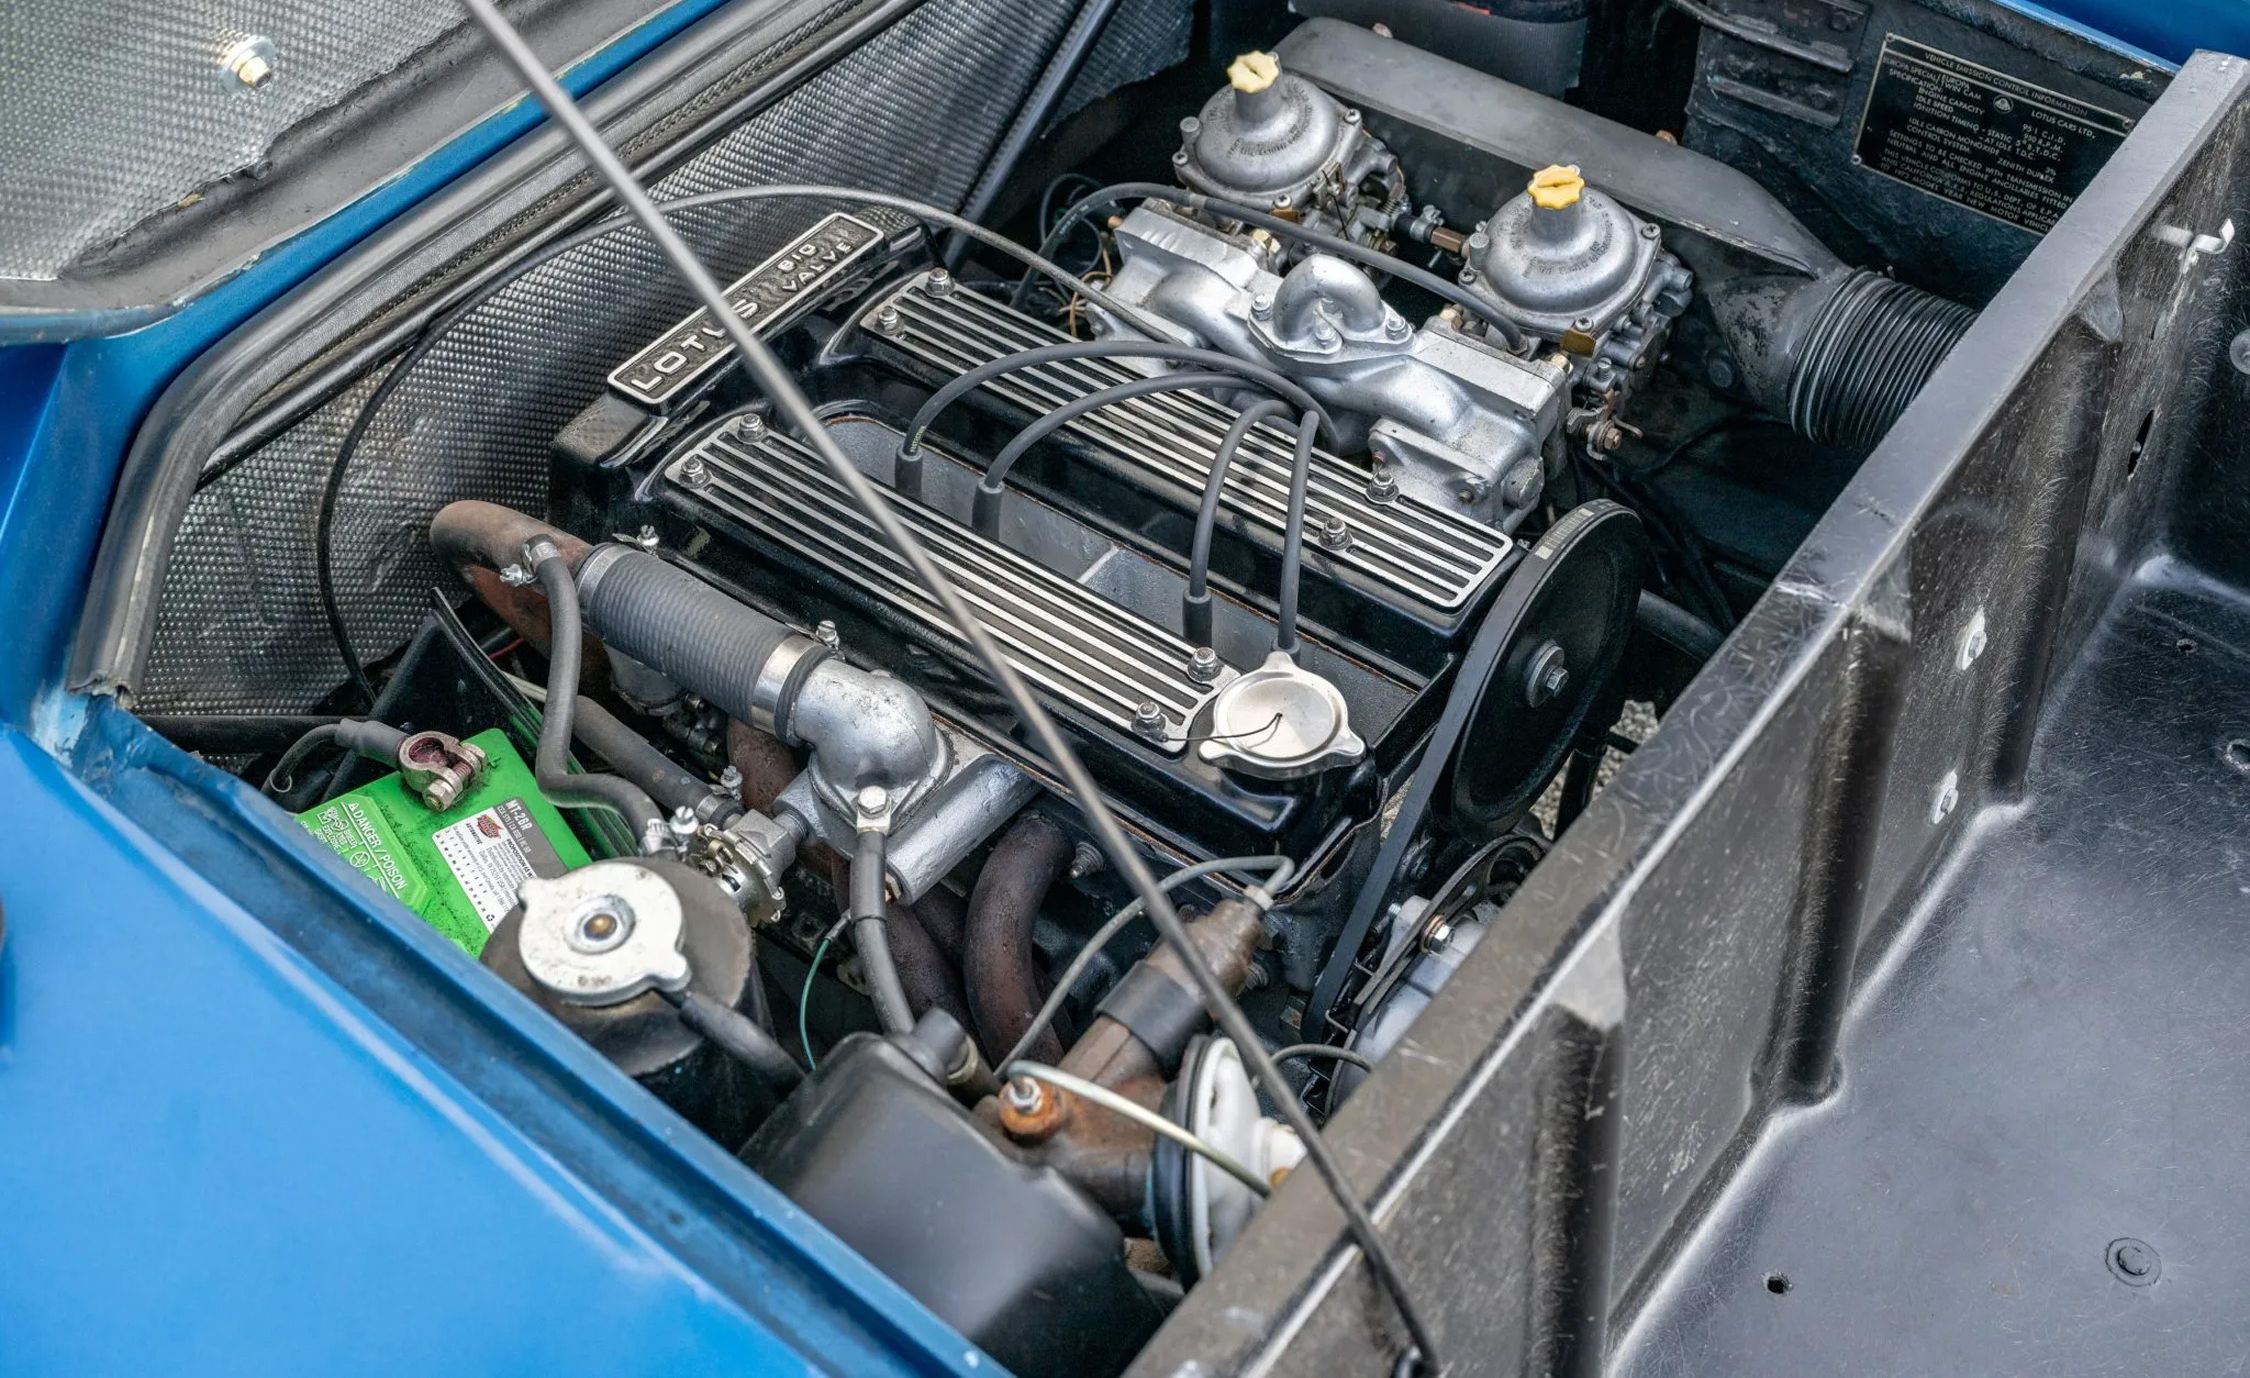 1973 lotus europa twin cam special engine